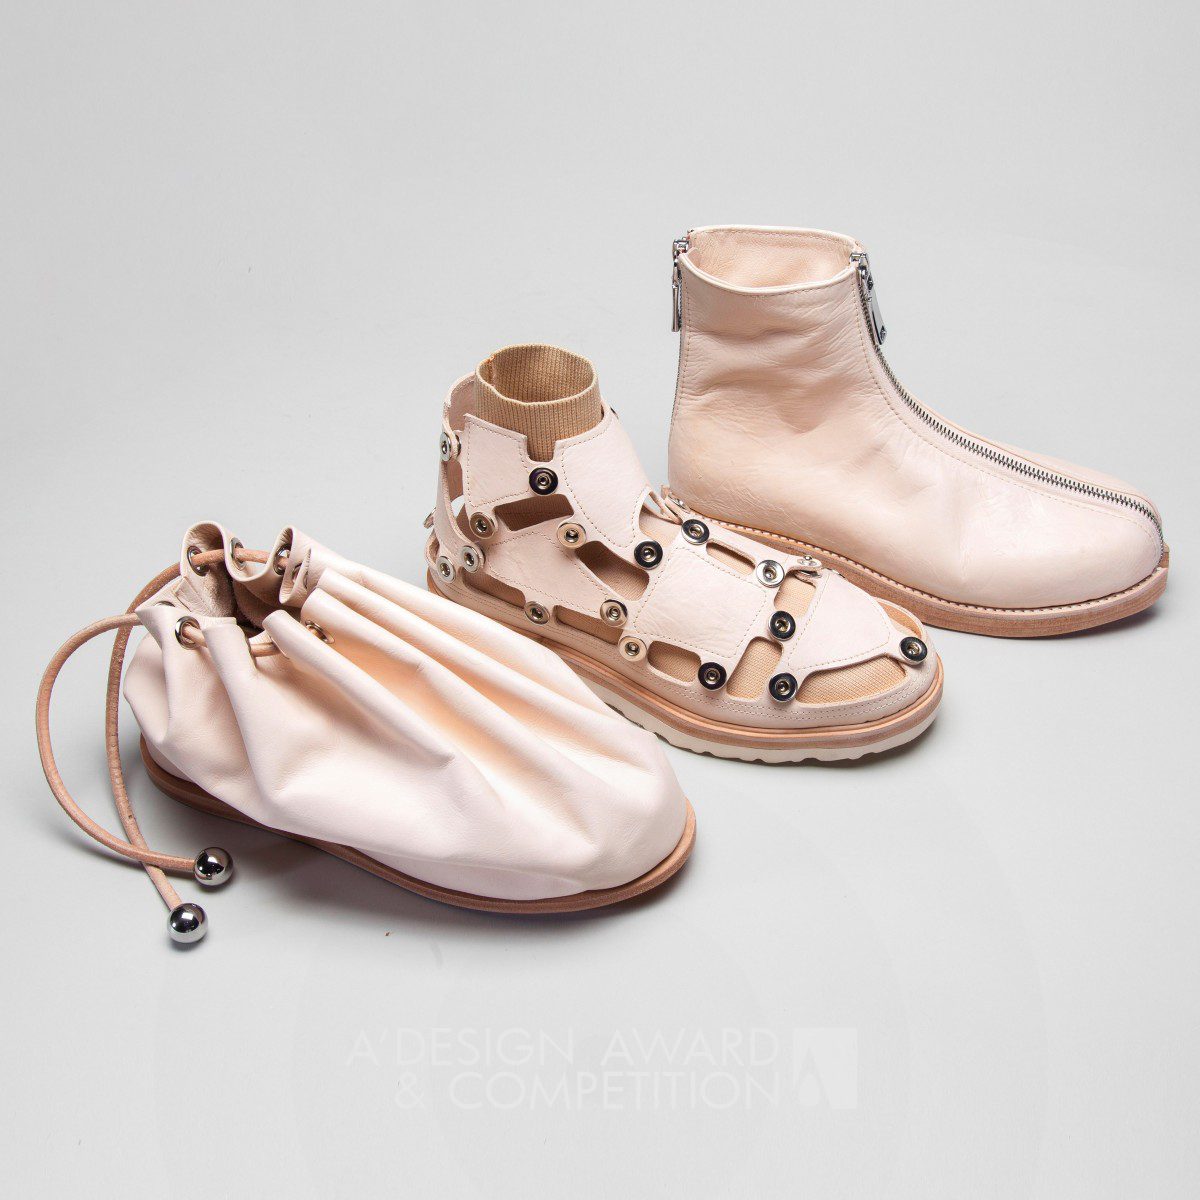 Ye Shen wins Silver at the prestigious A' Footwear, Shoes and Boots Design Award with Wacky Pack Interactive Footwear.